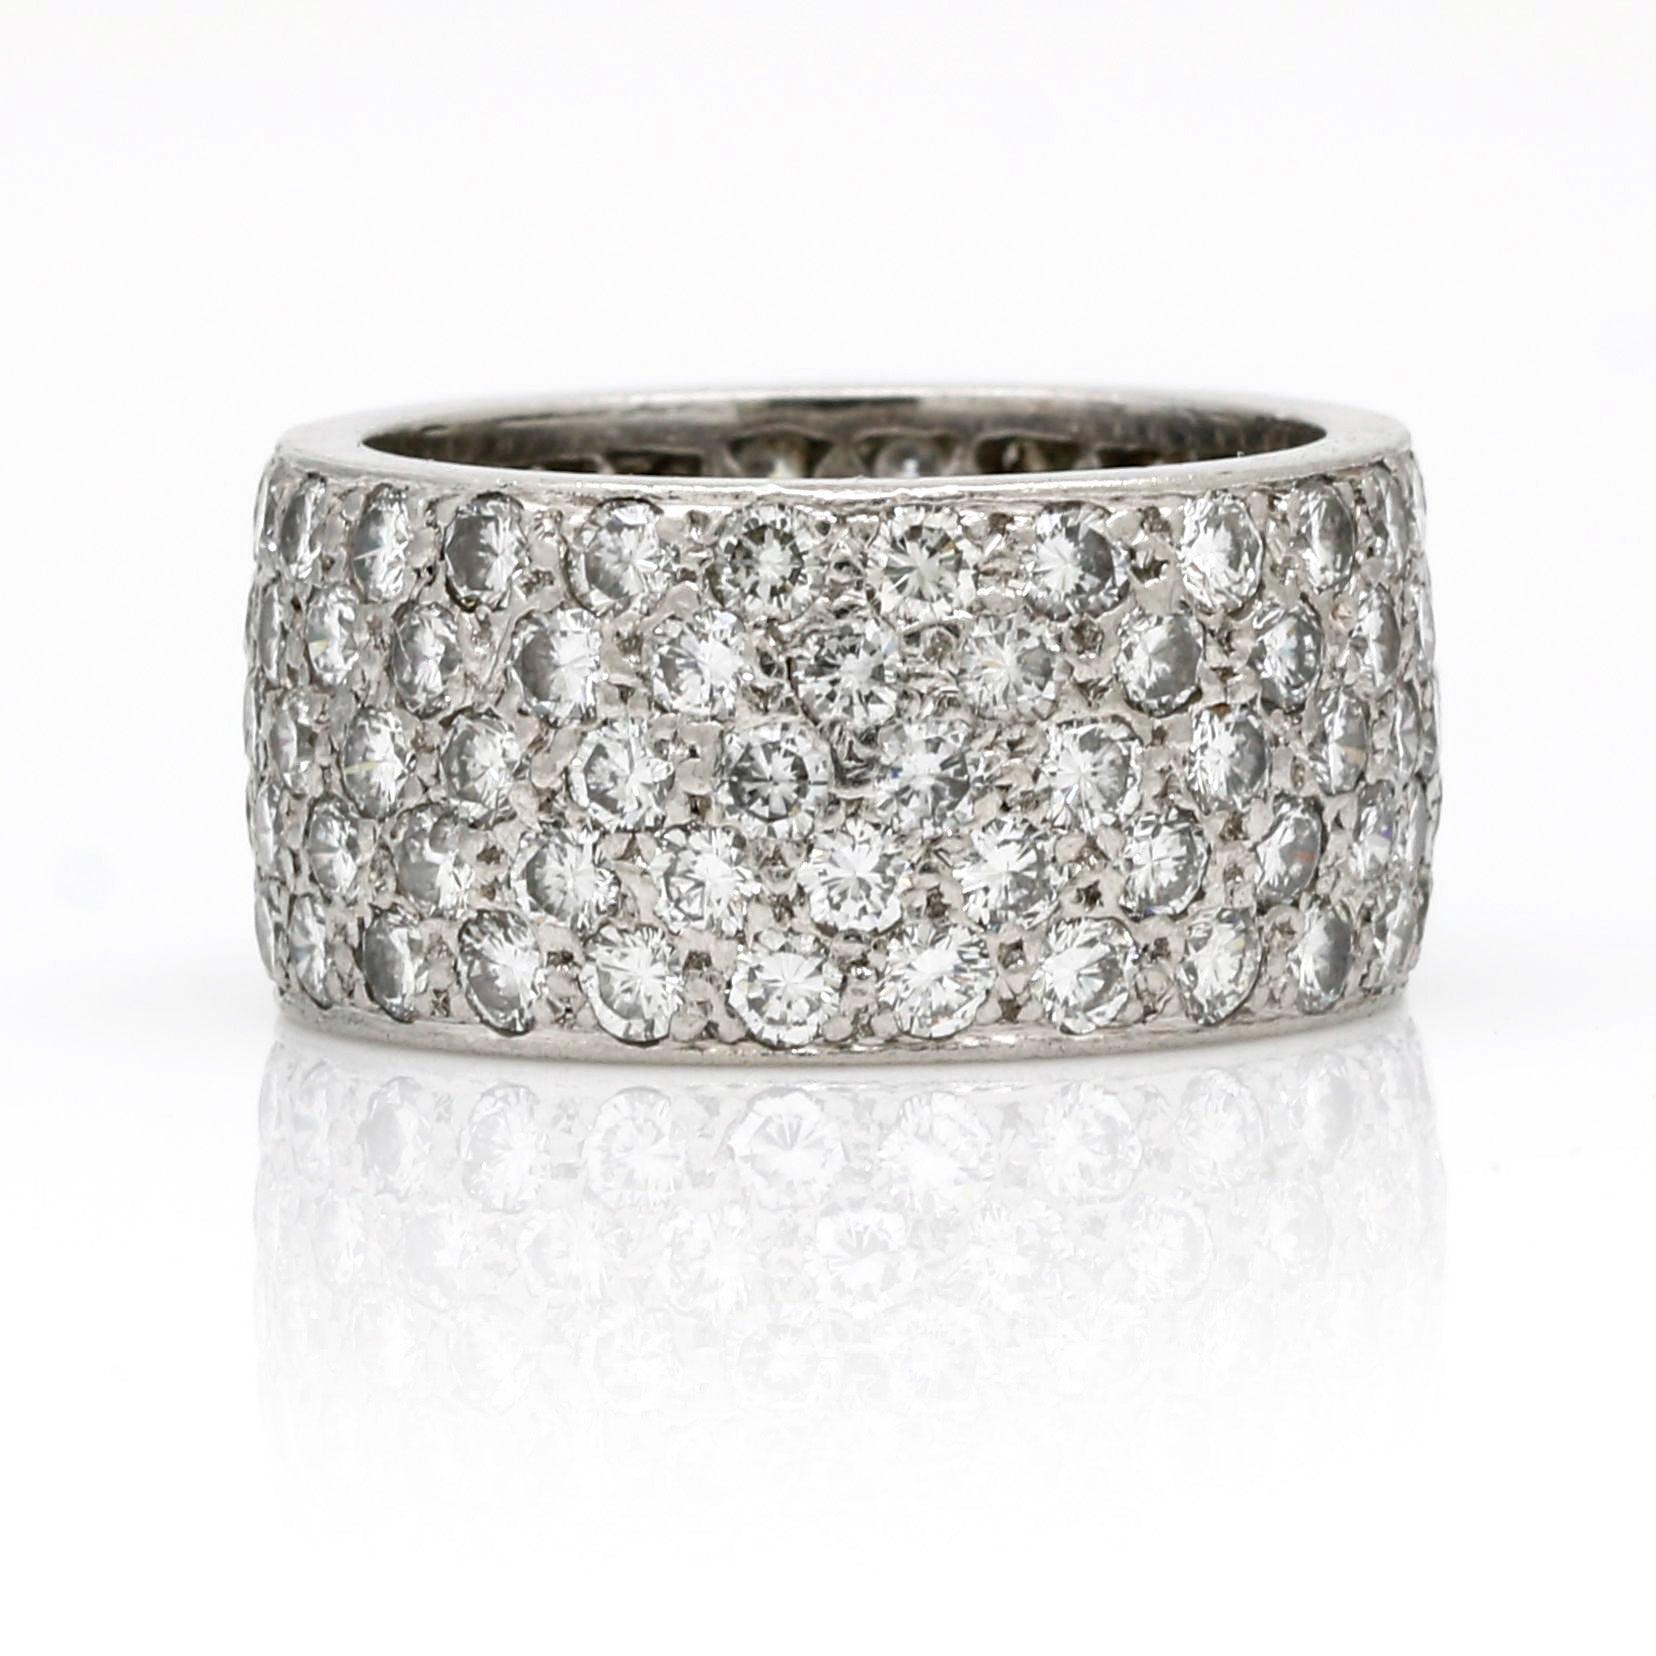 Women's Pave Diamond Wide Band Ring in Platinum 5.00 cttw - 31 Jewels Inc.